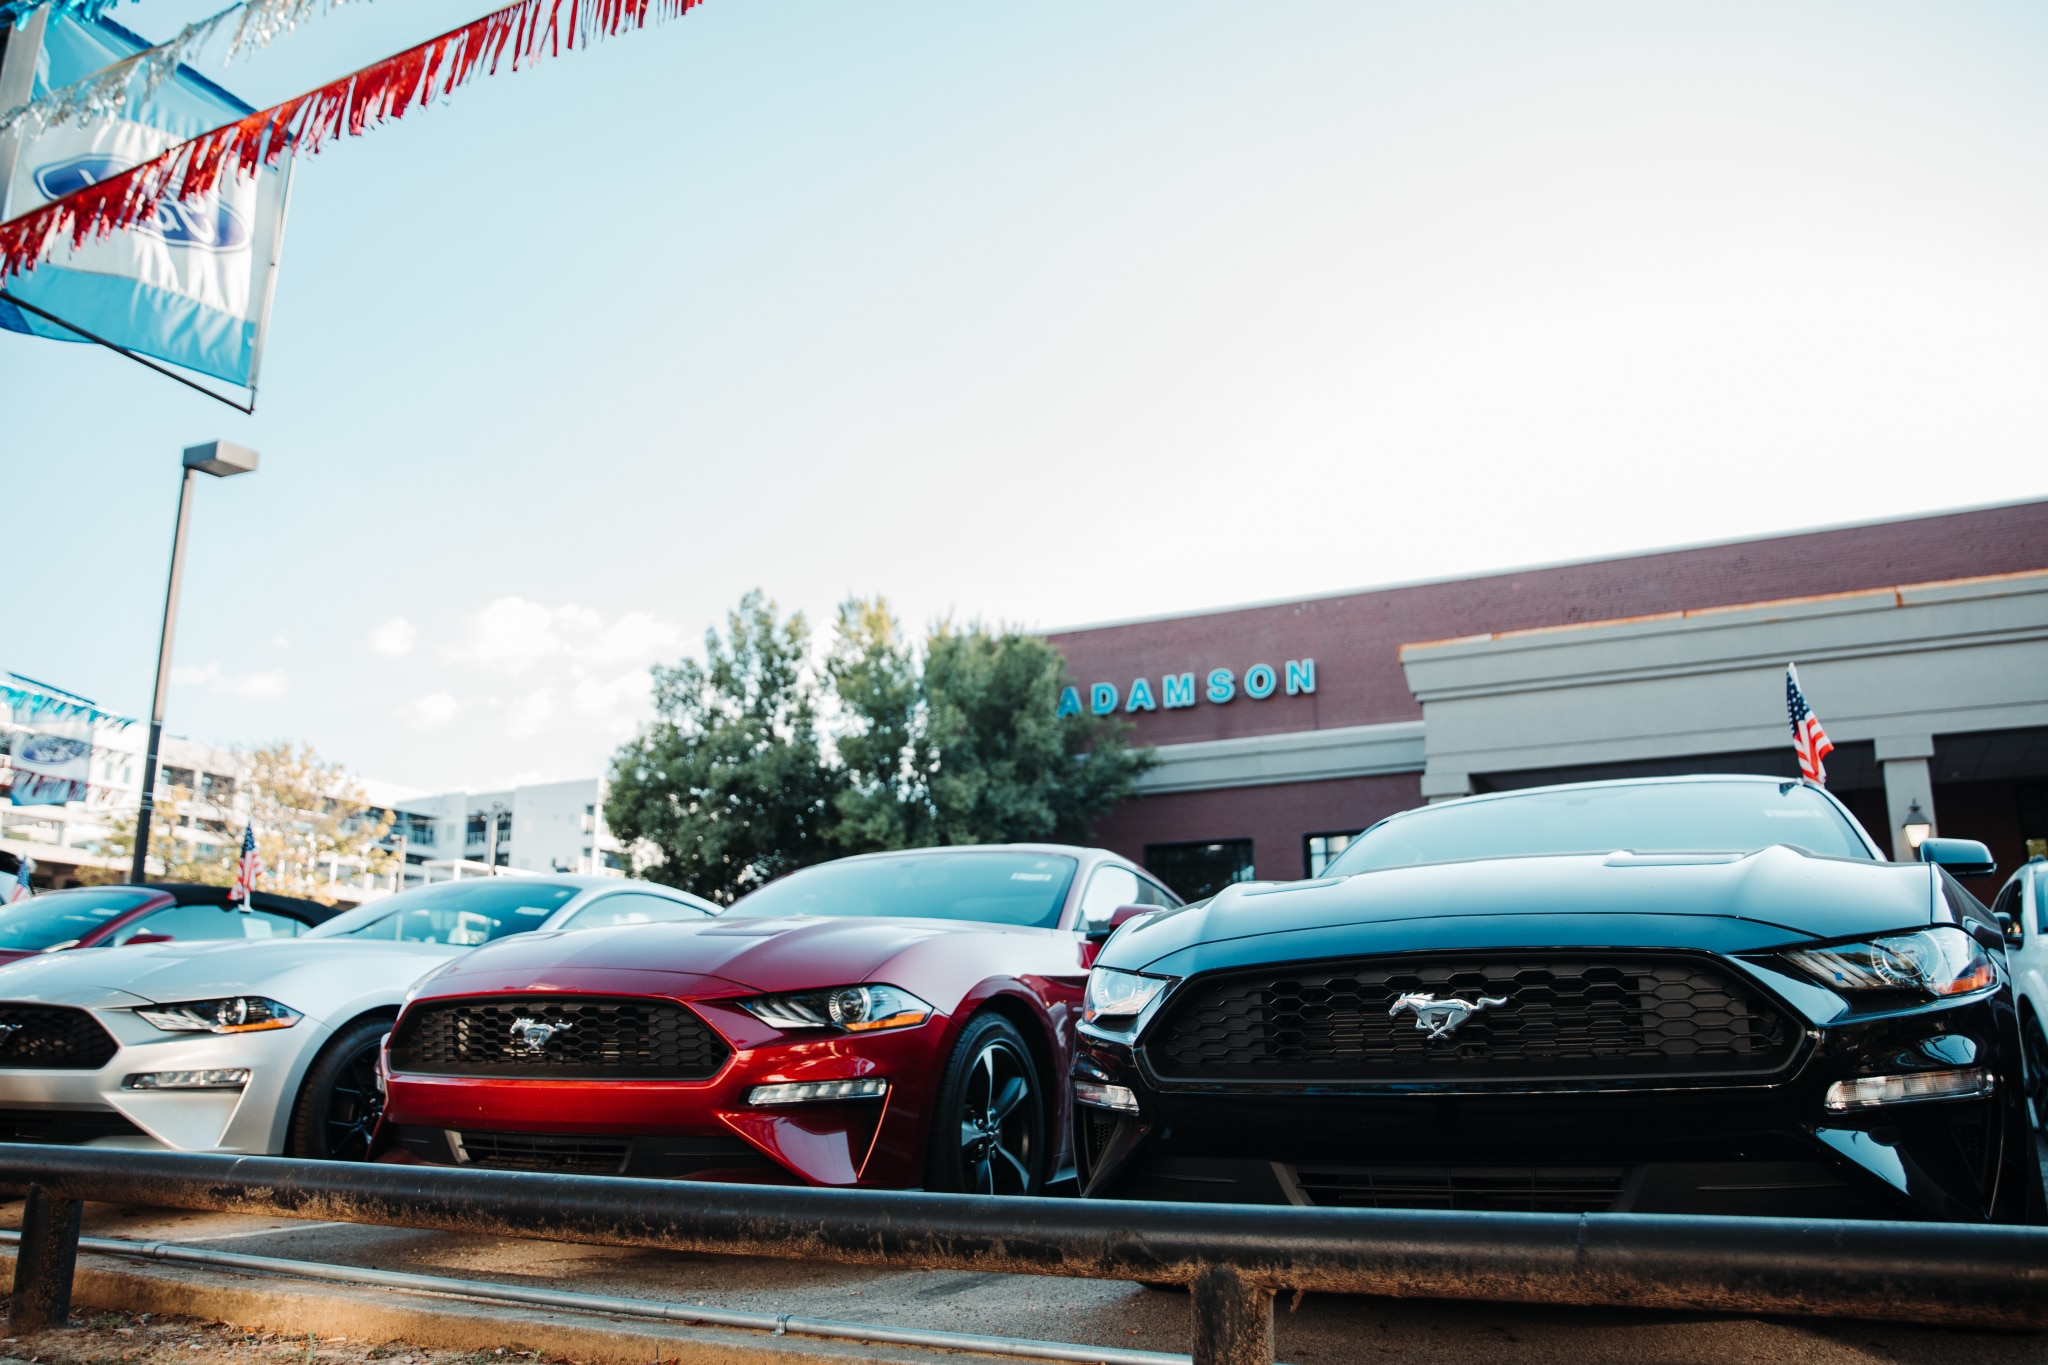 image 2 6 Find out how you could win big at Magic City Mustang's All Ford Show on Oct. 5